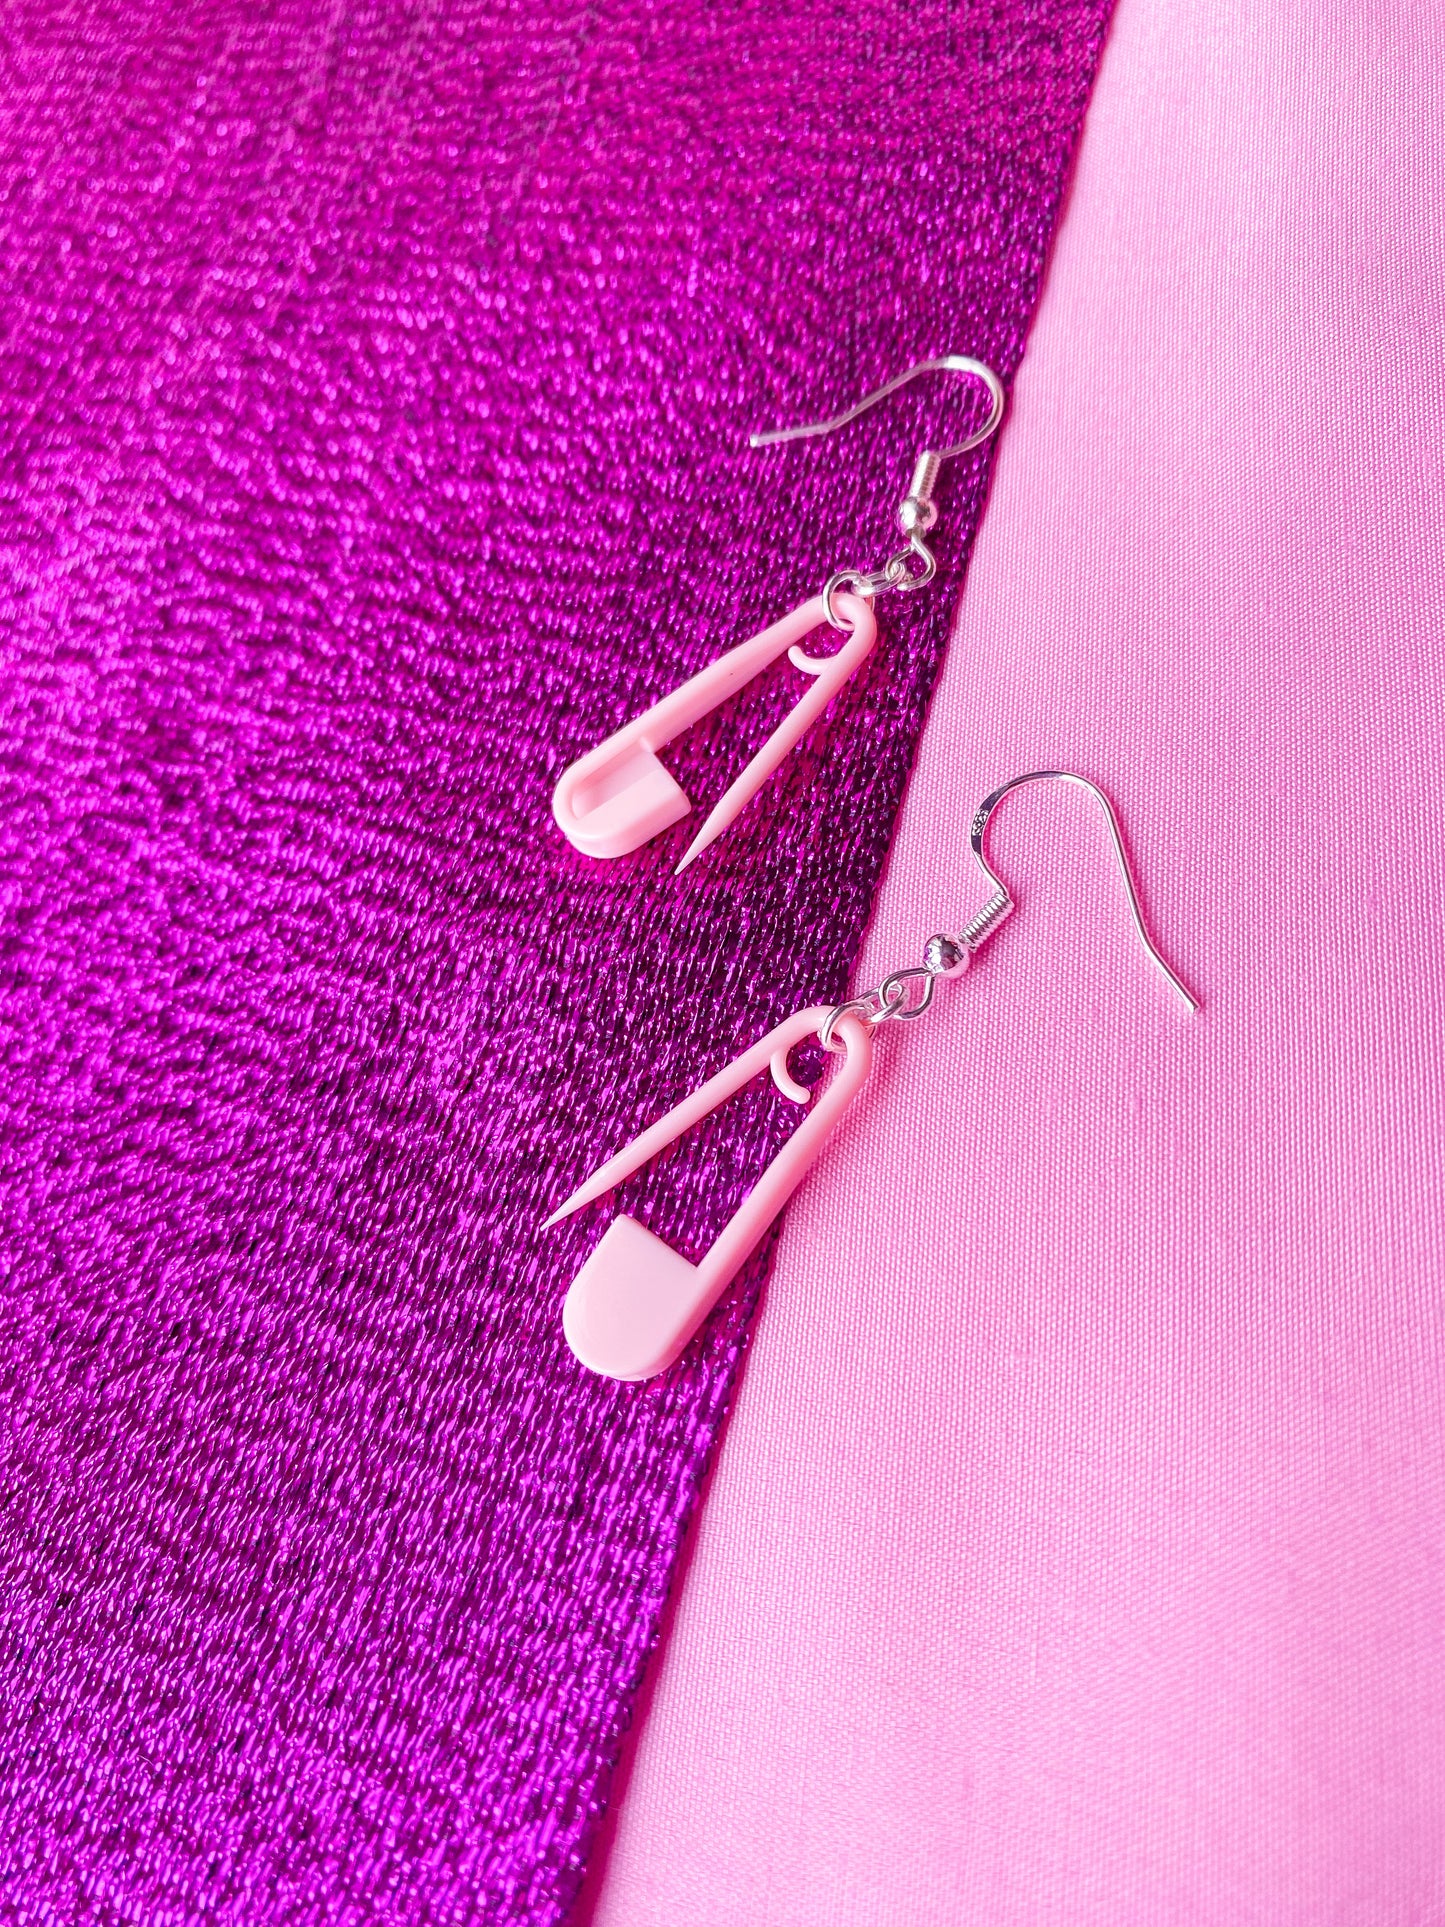 Pink safety pin earrings